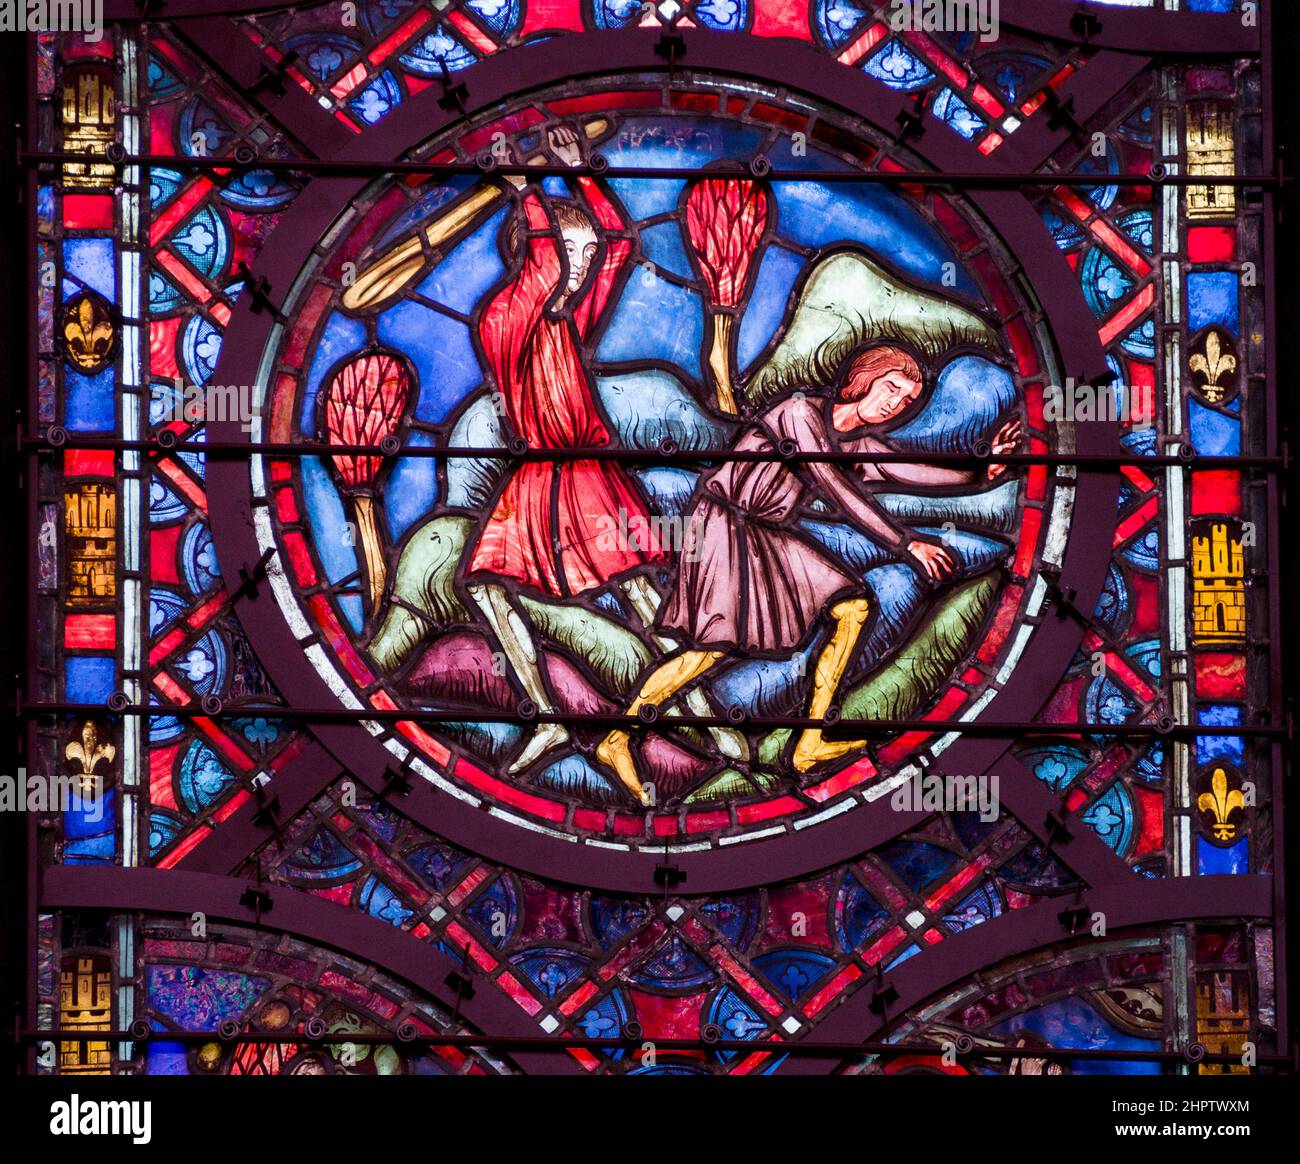 Fighting with a Bat in Stained Glass: Detail fom an ancient stained glass window in Sainte Chapelle. Two men fight with one holding a large bat ready to smash it over the other's back or head.. Stock Photo